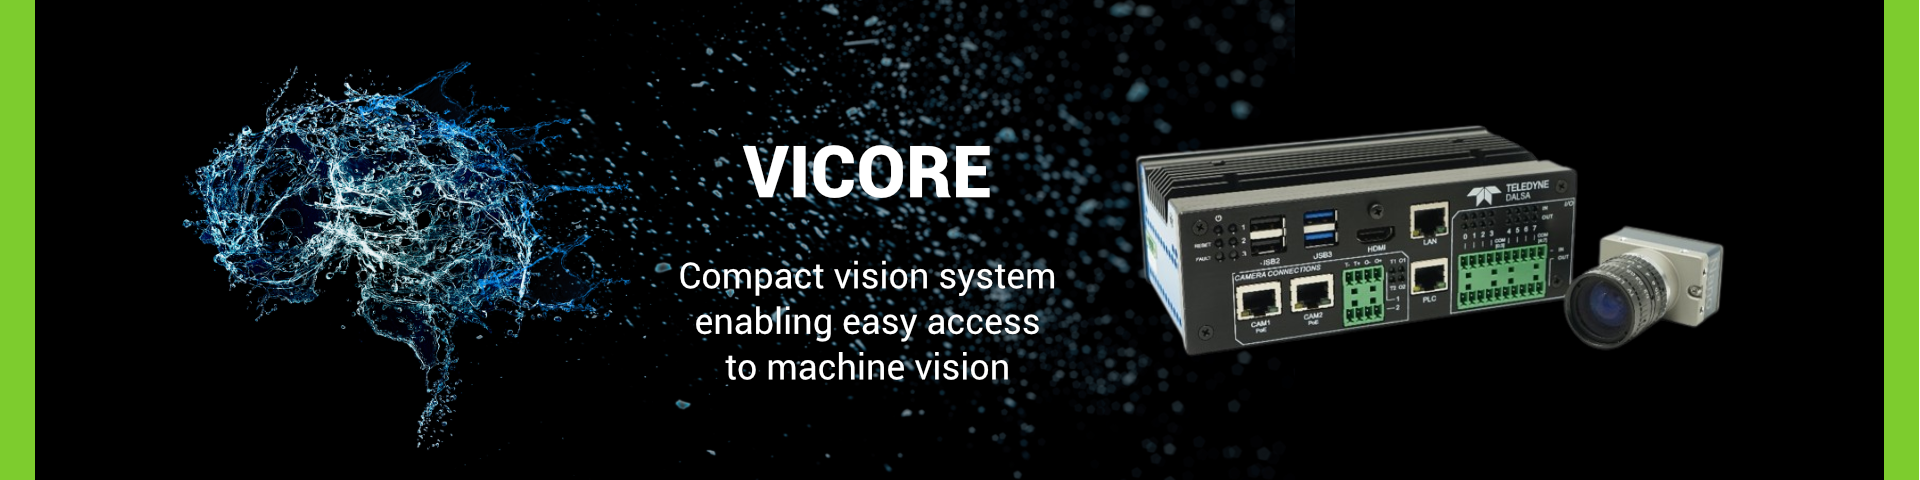 Vicore compact smart vision system from Teledyne Dalsa